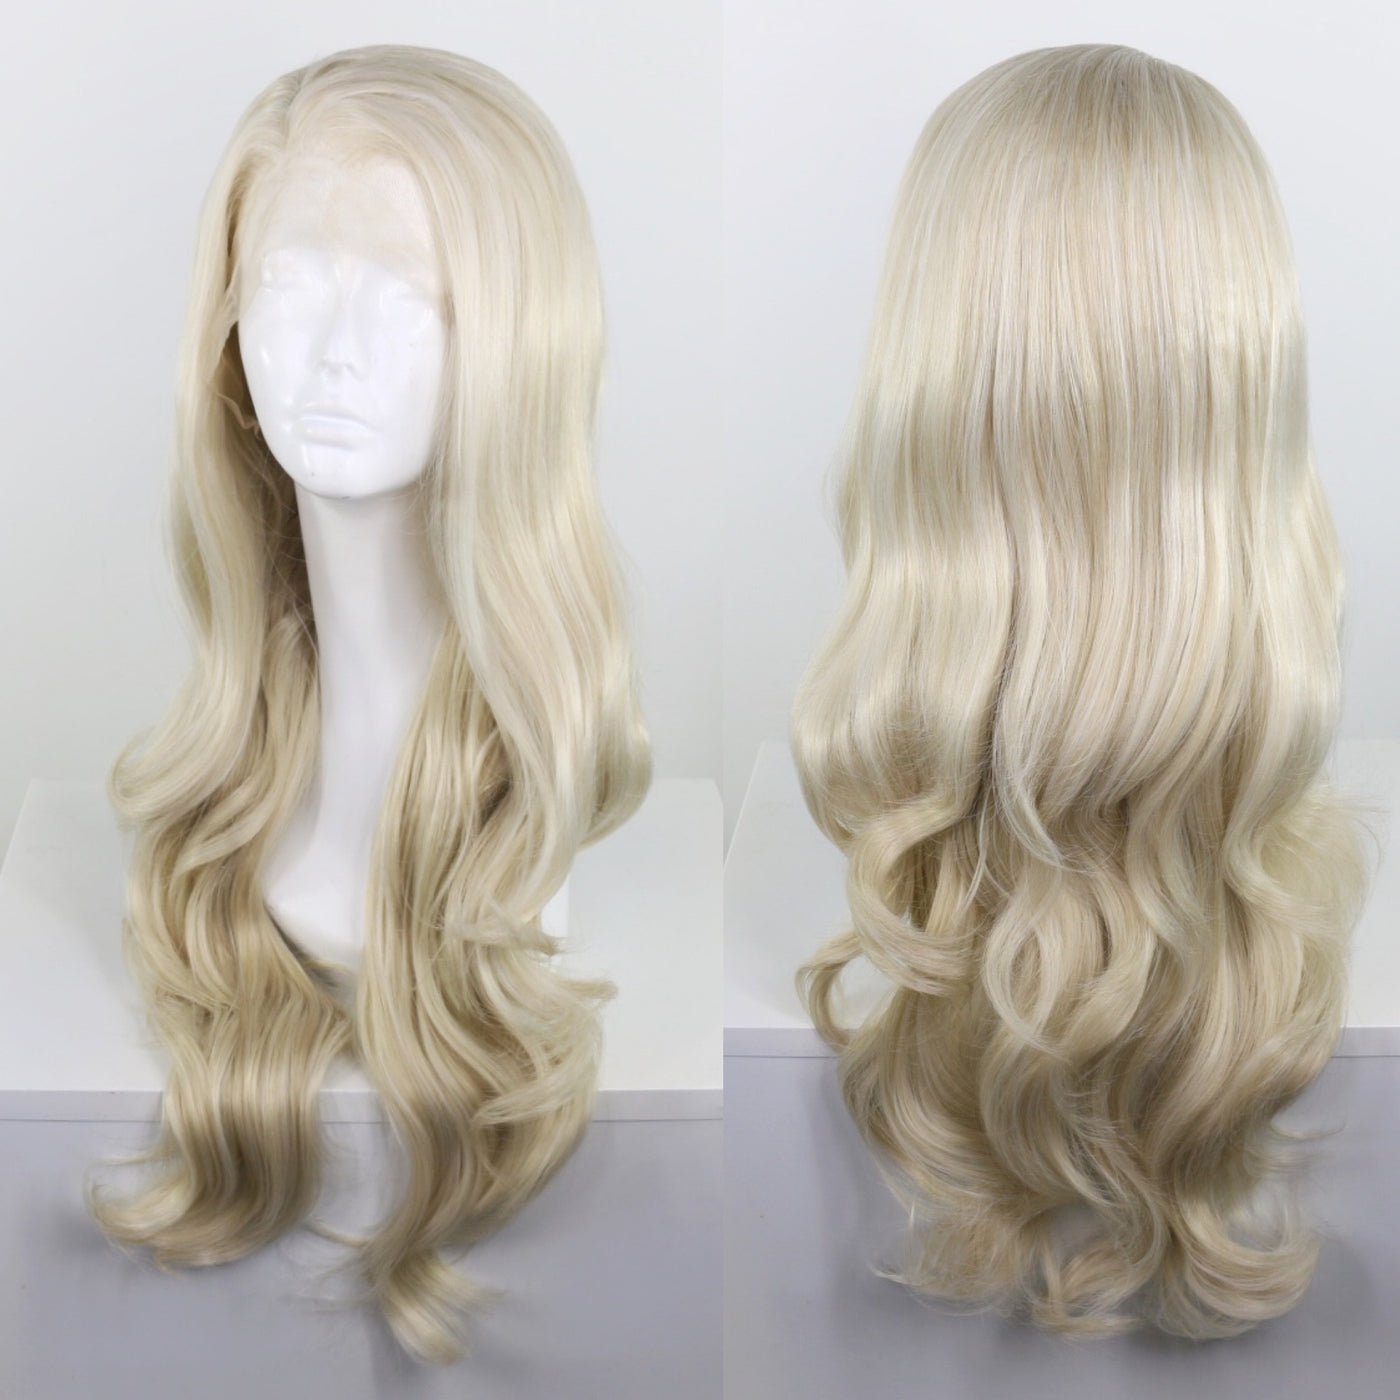 Evelyn Ash Blonde Lace Front Wig